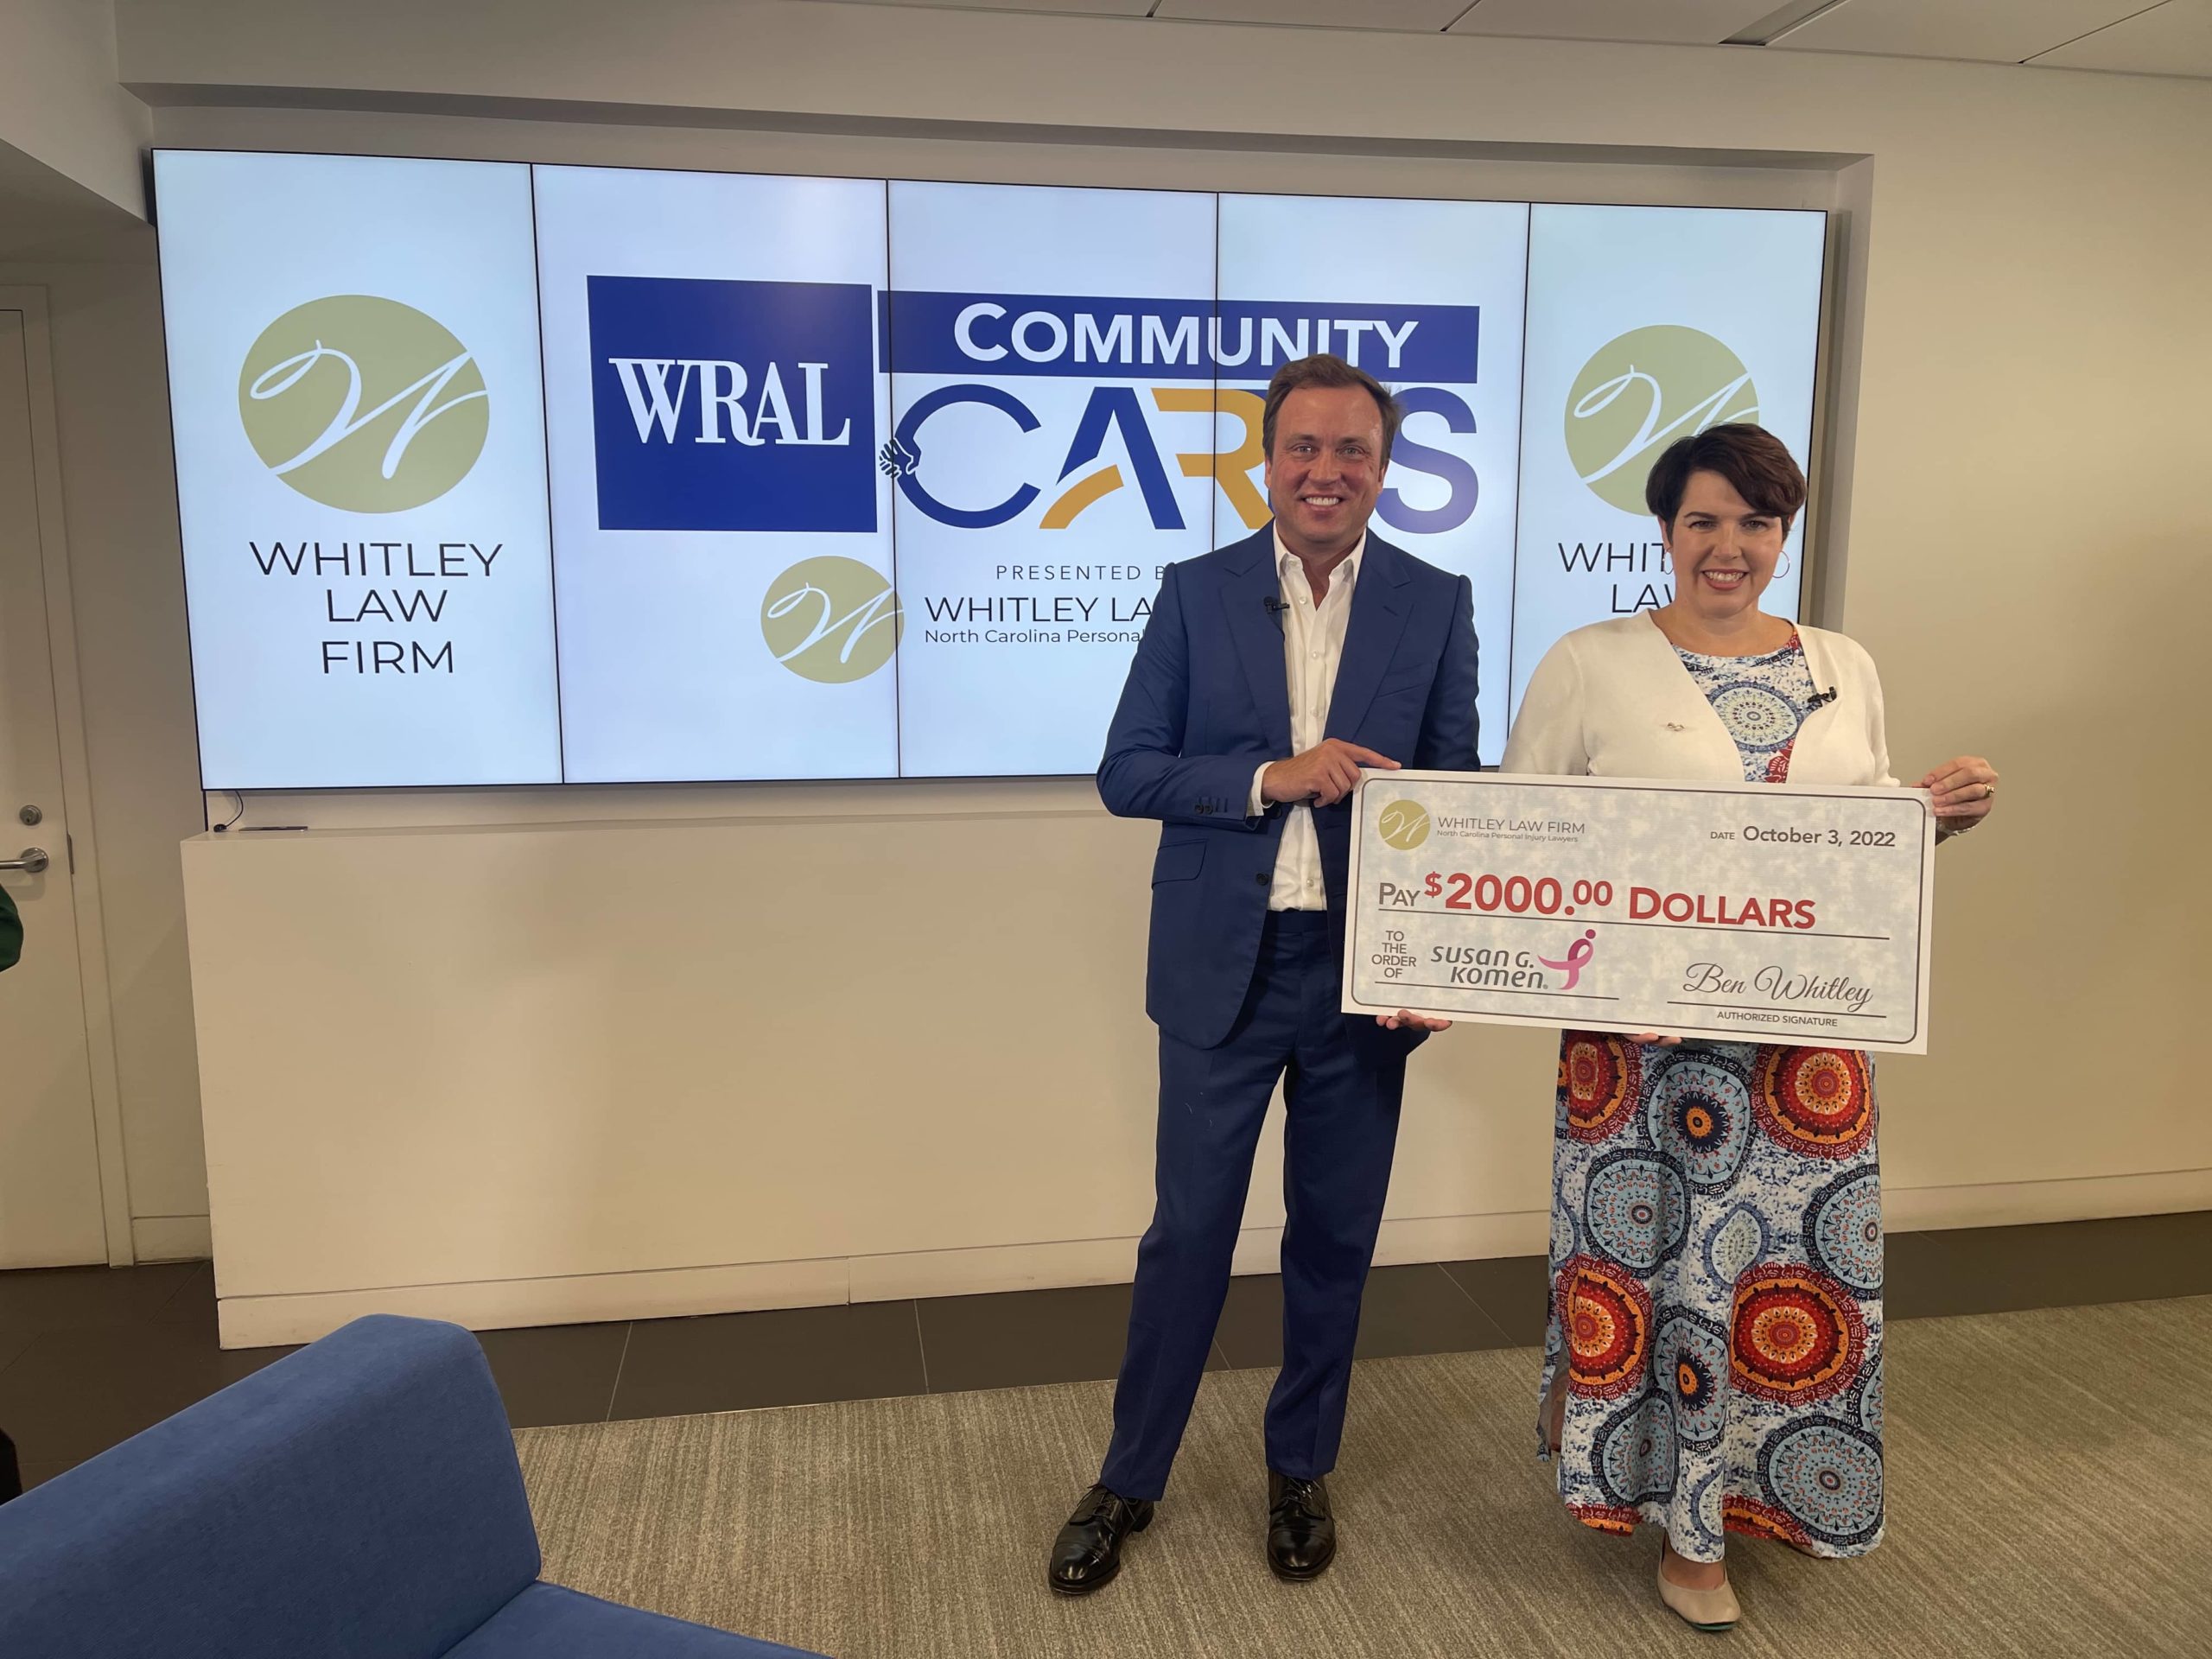 Ben Whitley of the Whitley Law Firm presenting a donation check to Kimberly Burrows, Susan G. Komen State Executive Director of North and South Carolina